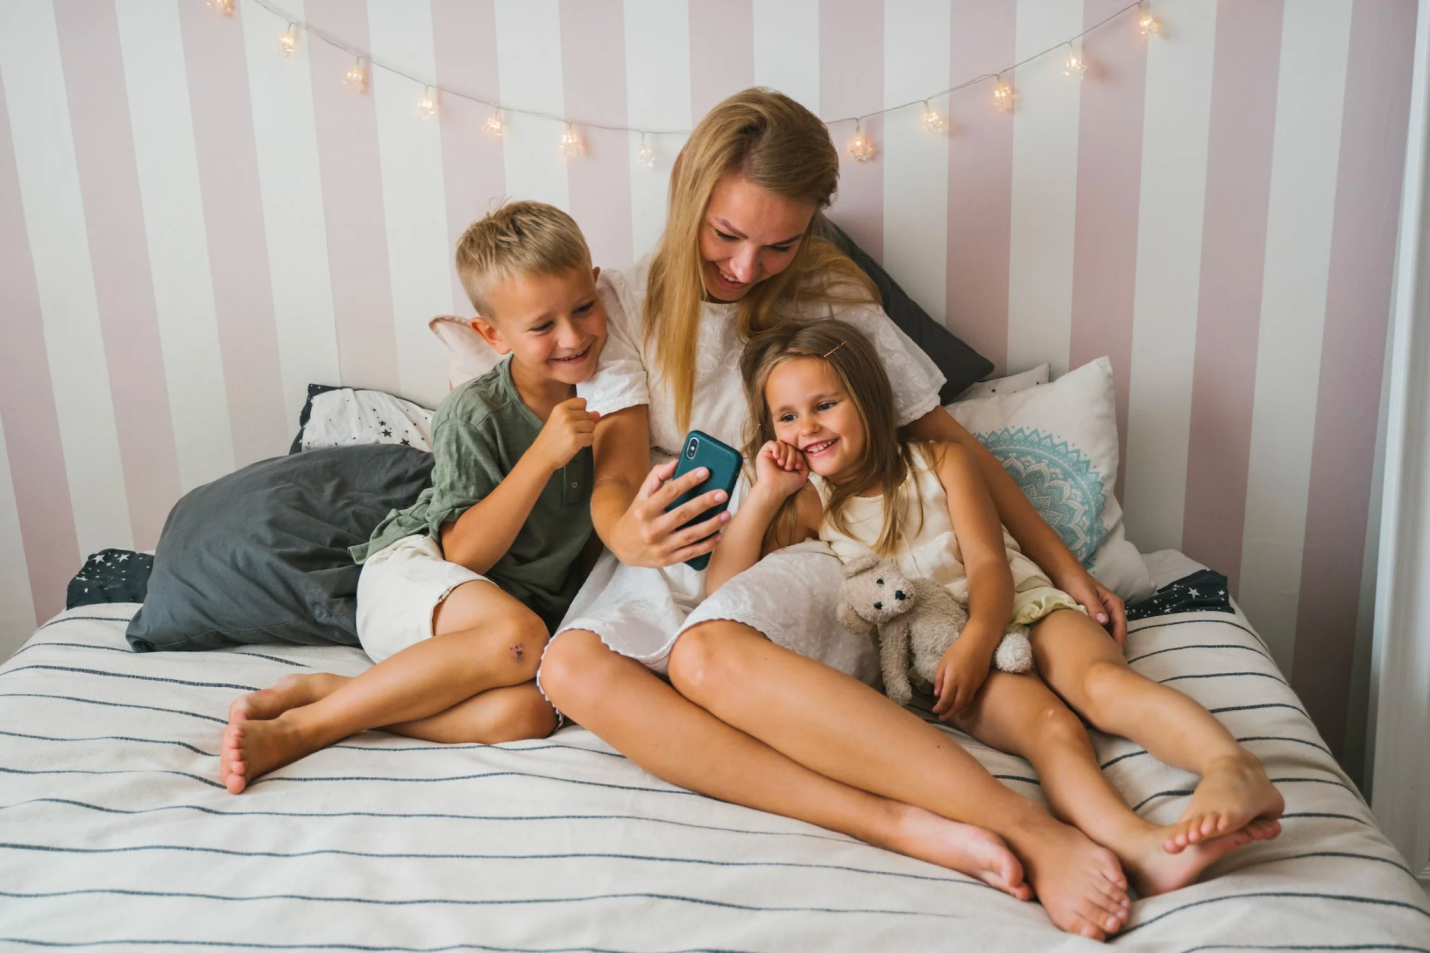 A mother cuddles with her children in bed as they speak to someone on the phone.